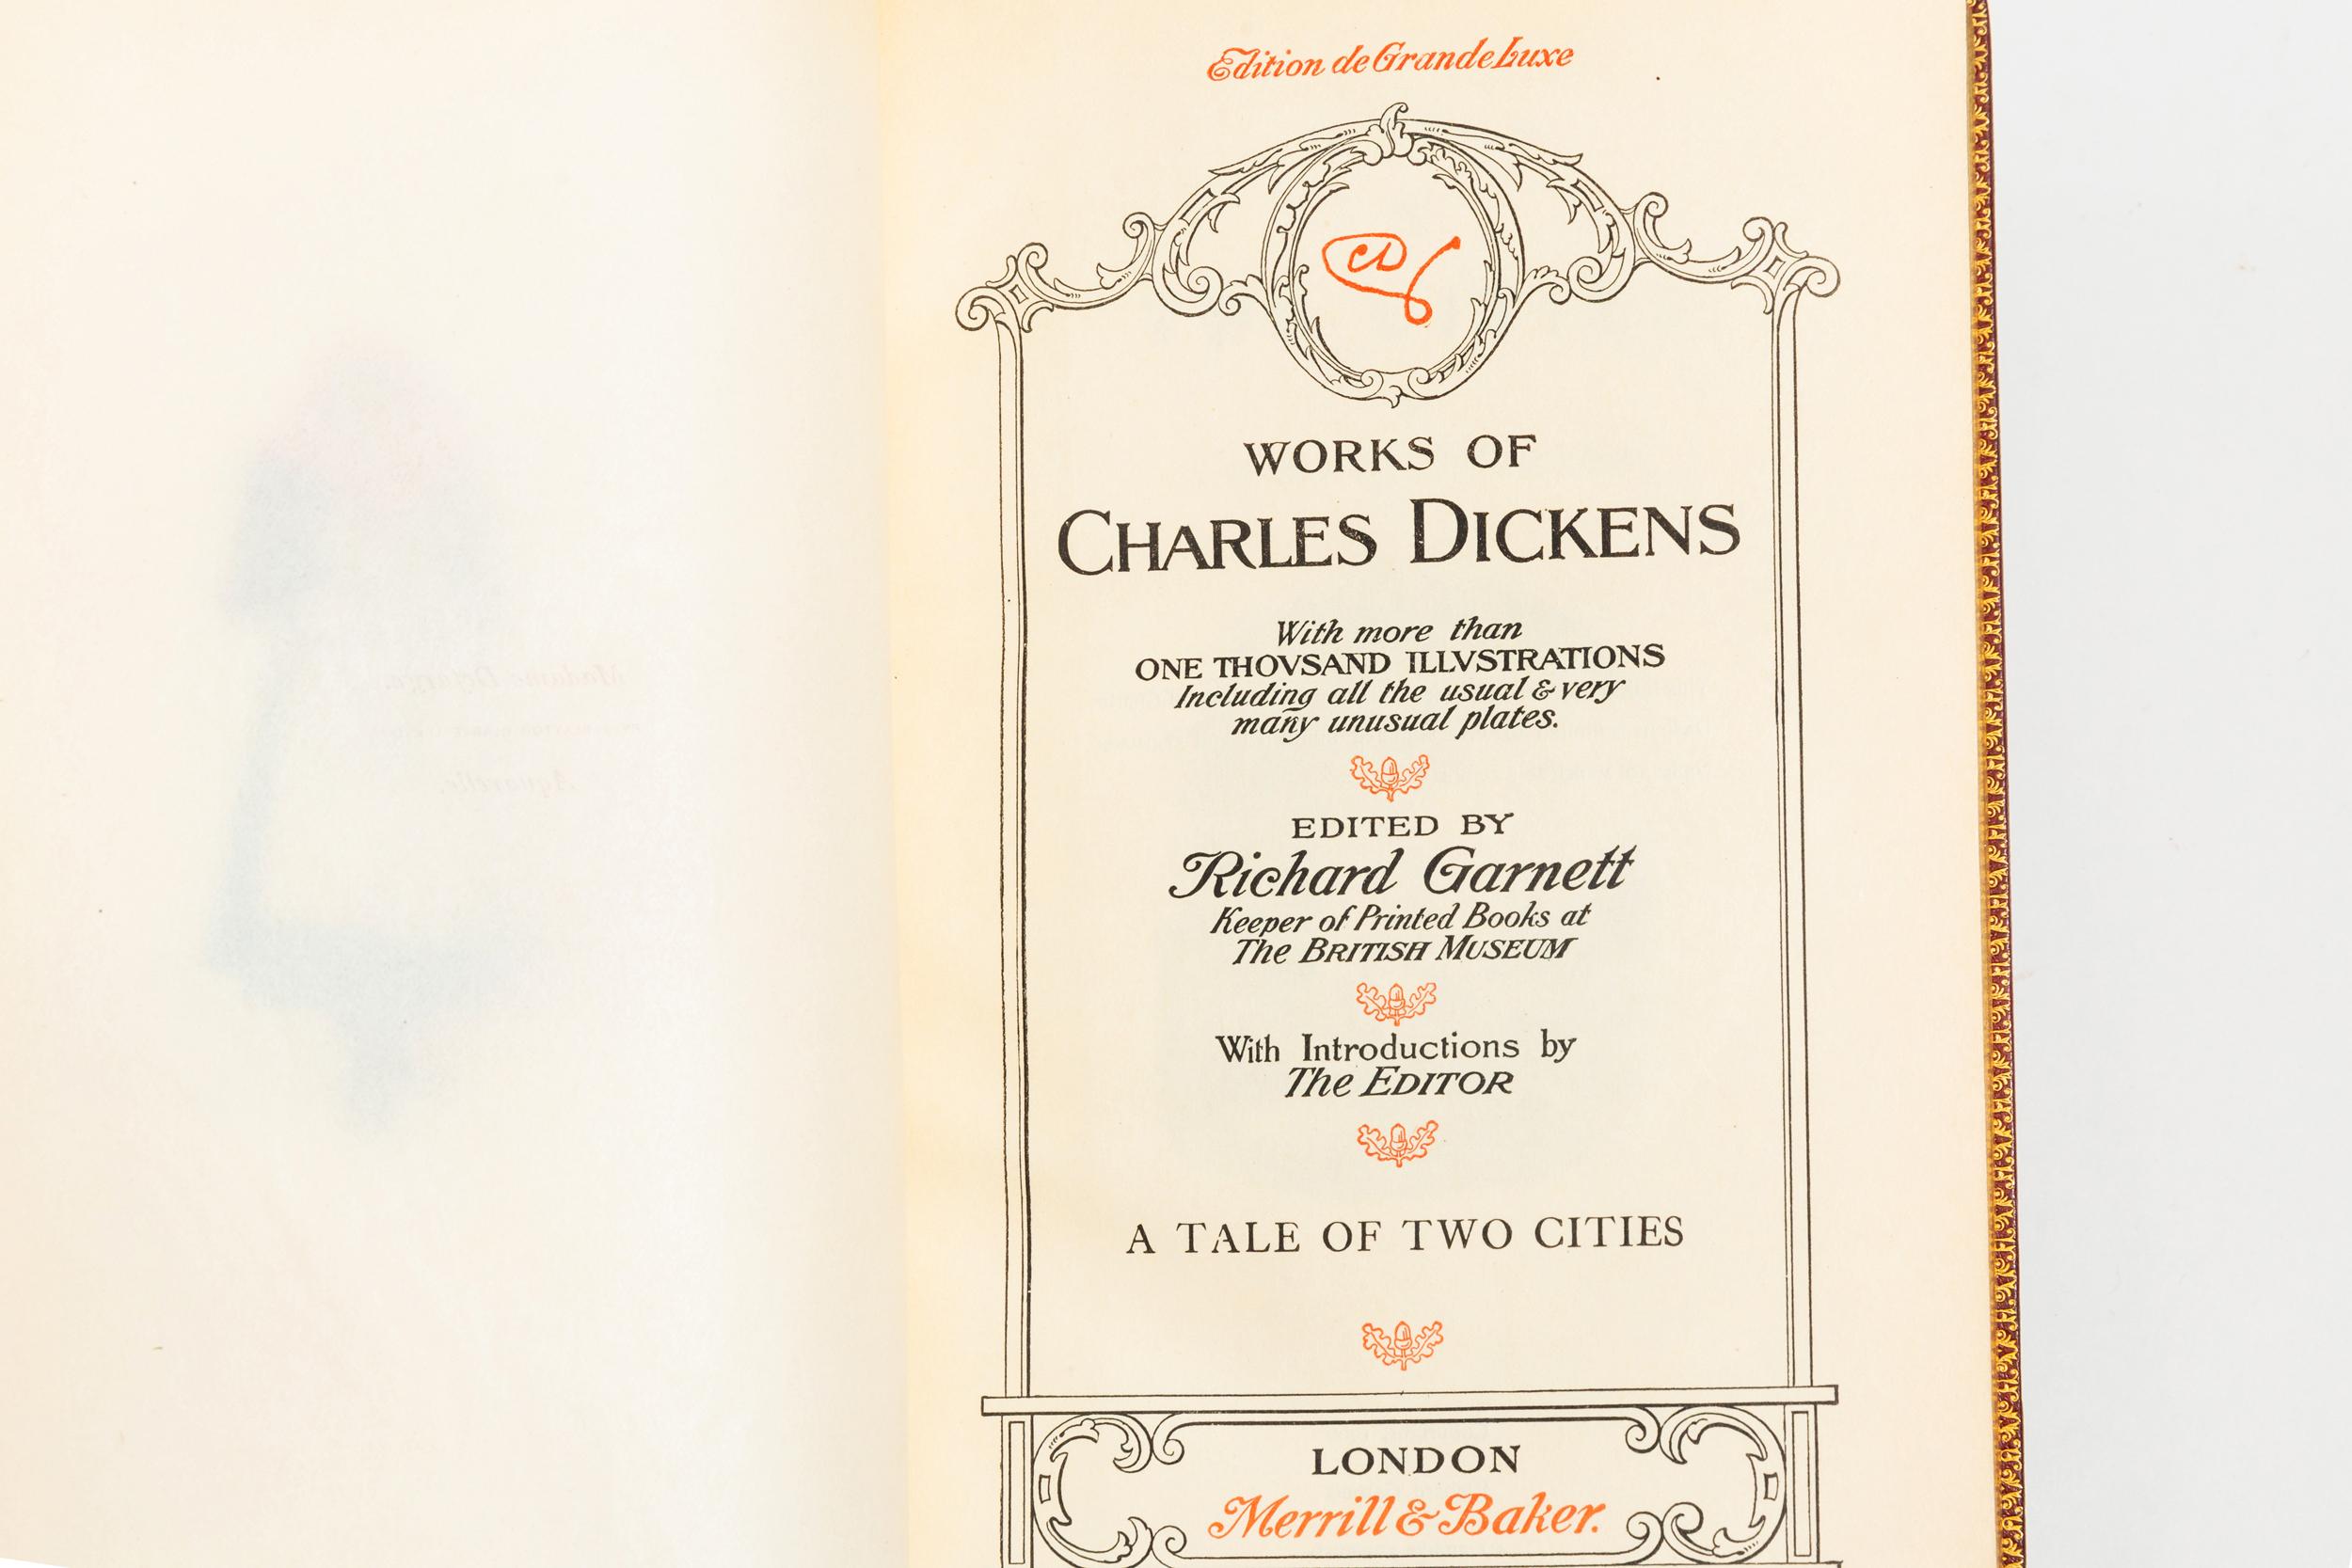 32 Volumes. Charles Dickens, The Works of Charles Dickens 1